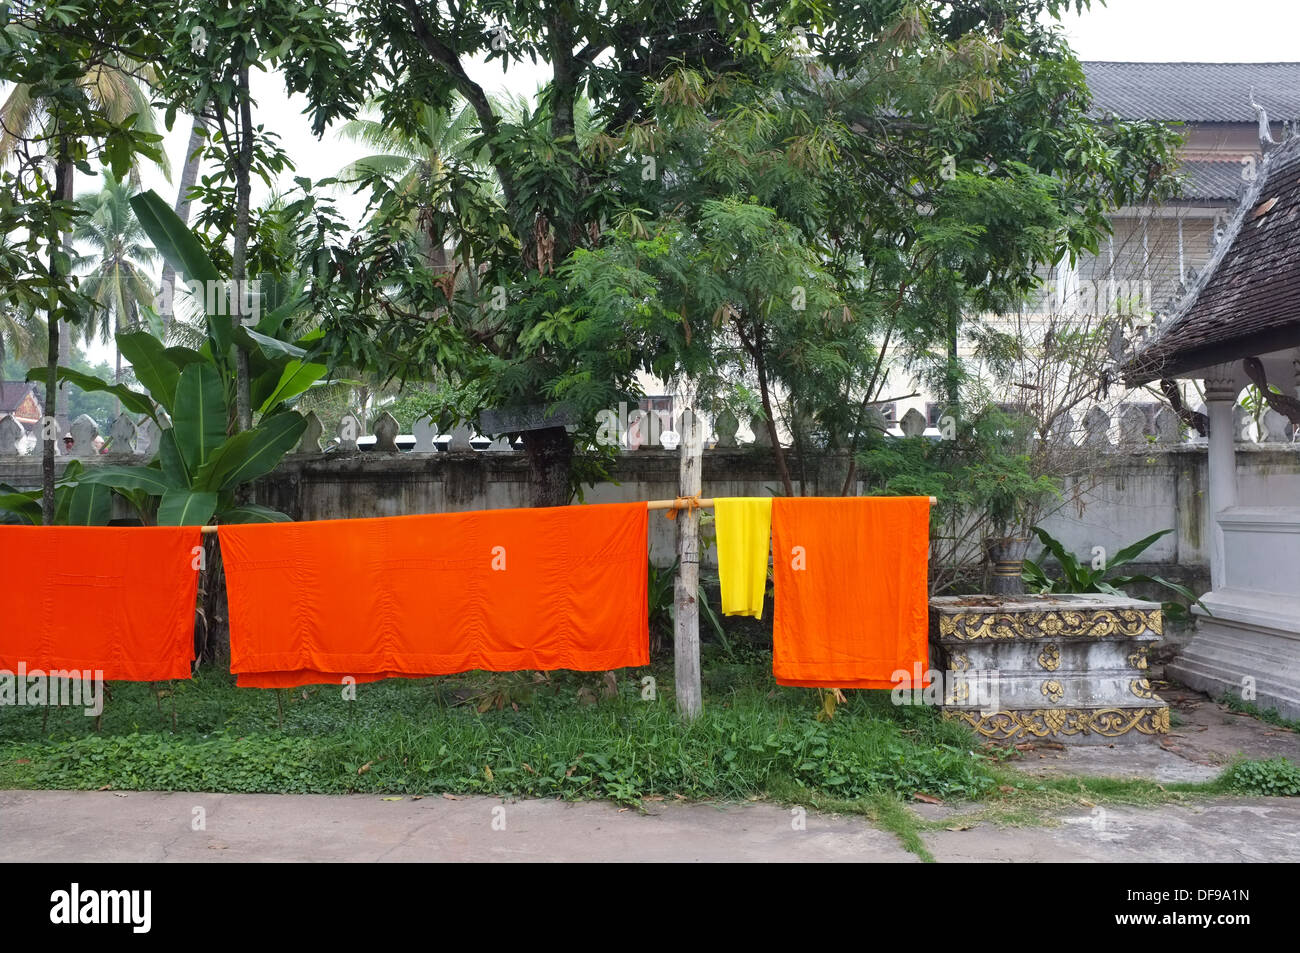 Monks' robes drying outdoors at temple in Luang Prabang, Laos. Stock Photo